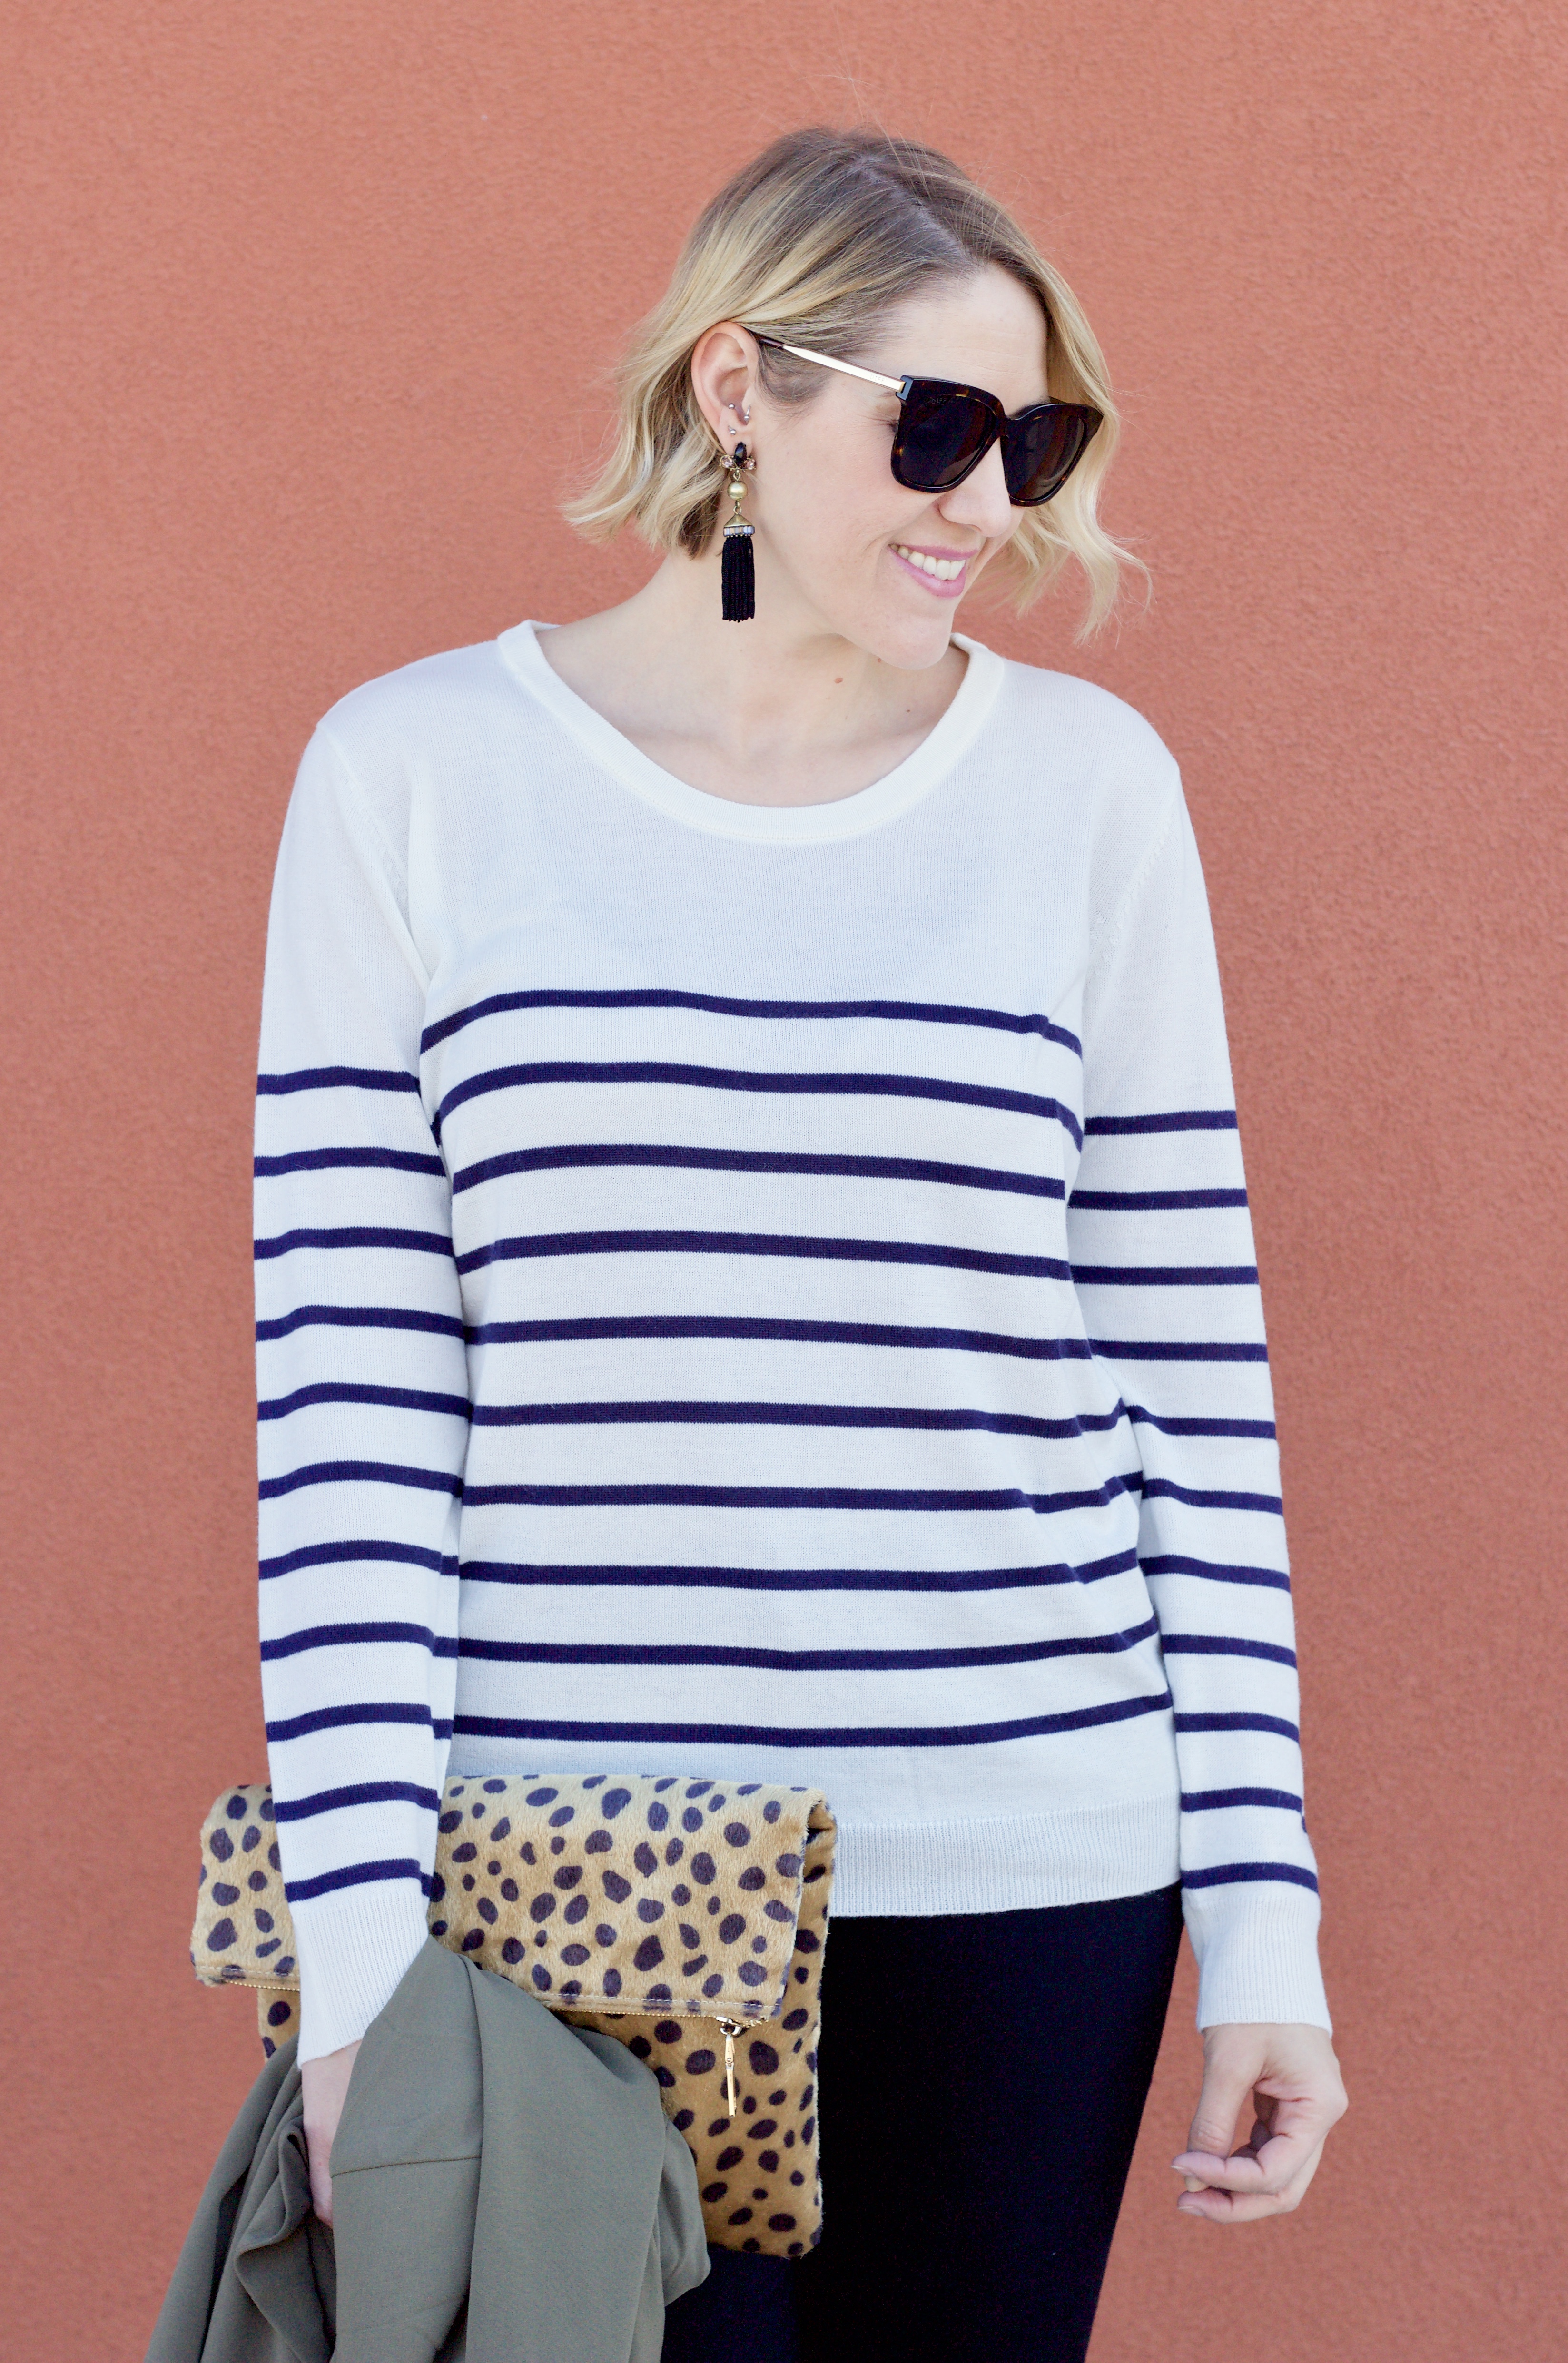 stripes and leopard pattern mixing